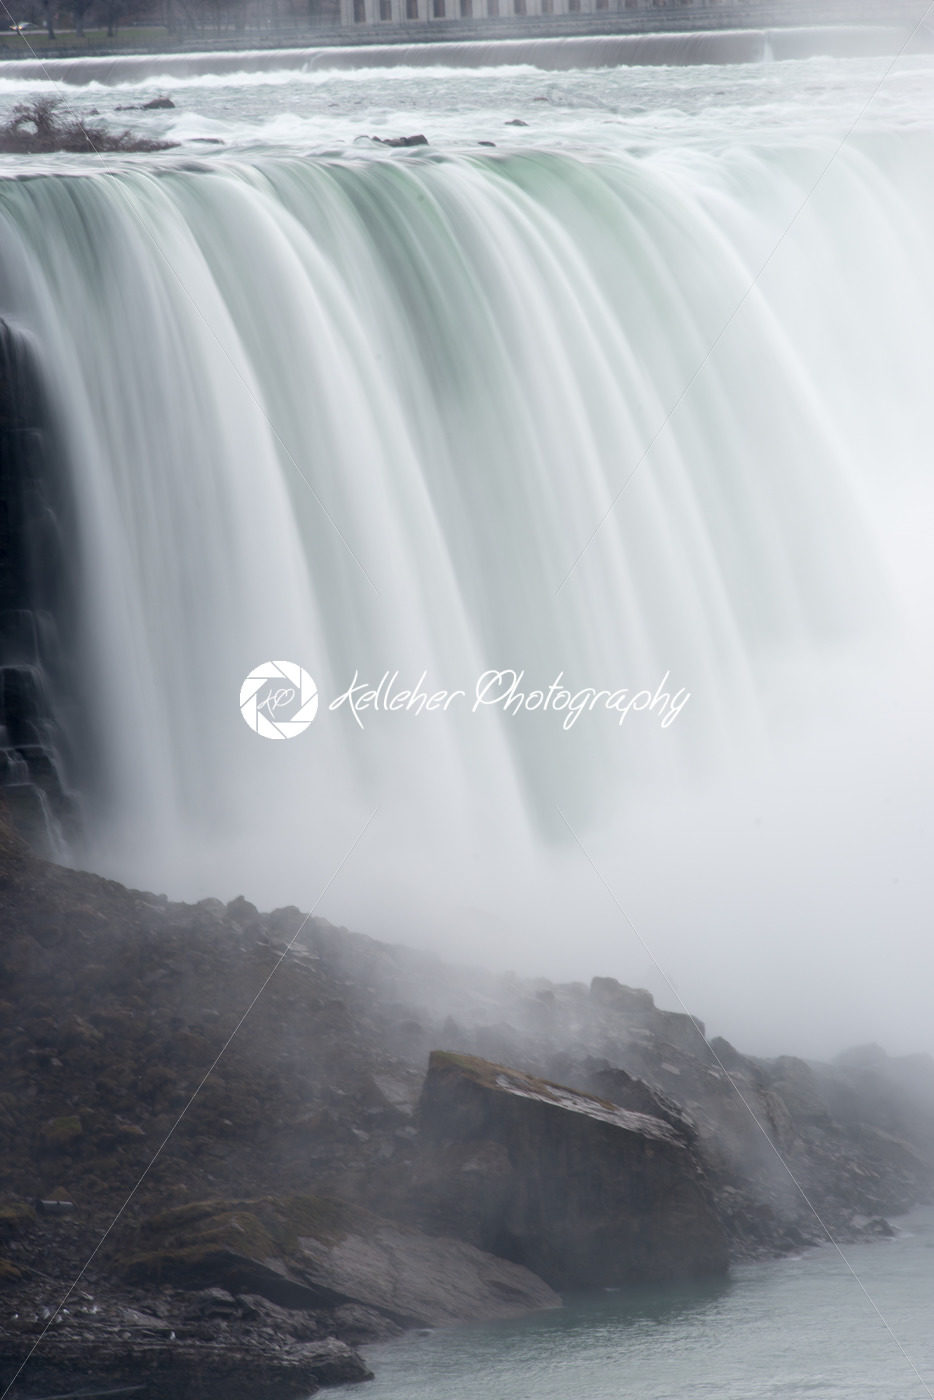 American Falls in Early Evening – View from Niagara Falls, Ontario Canada - Kelleher Photography Store